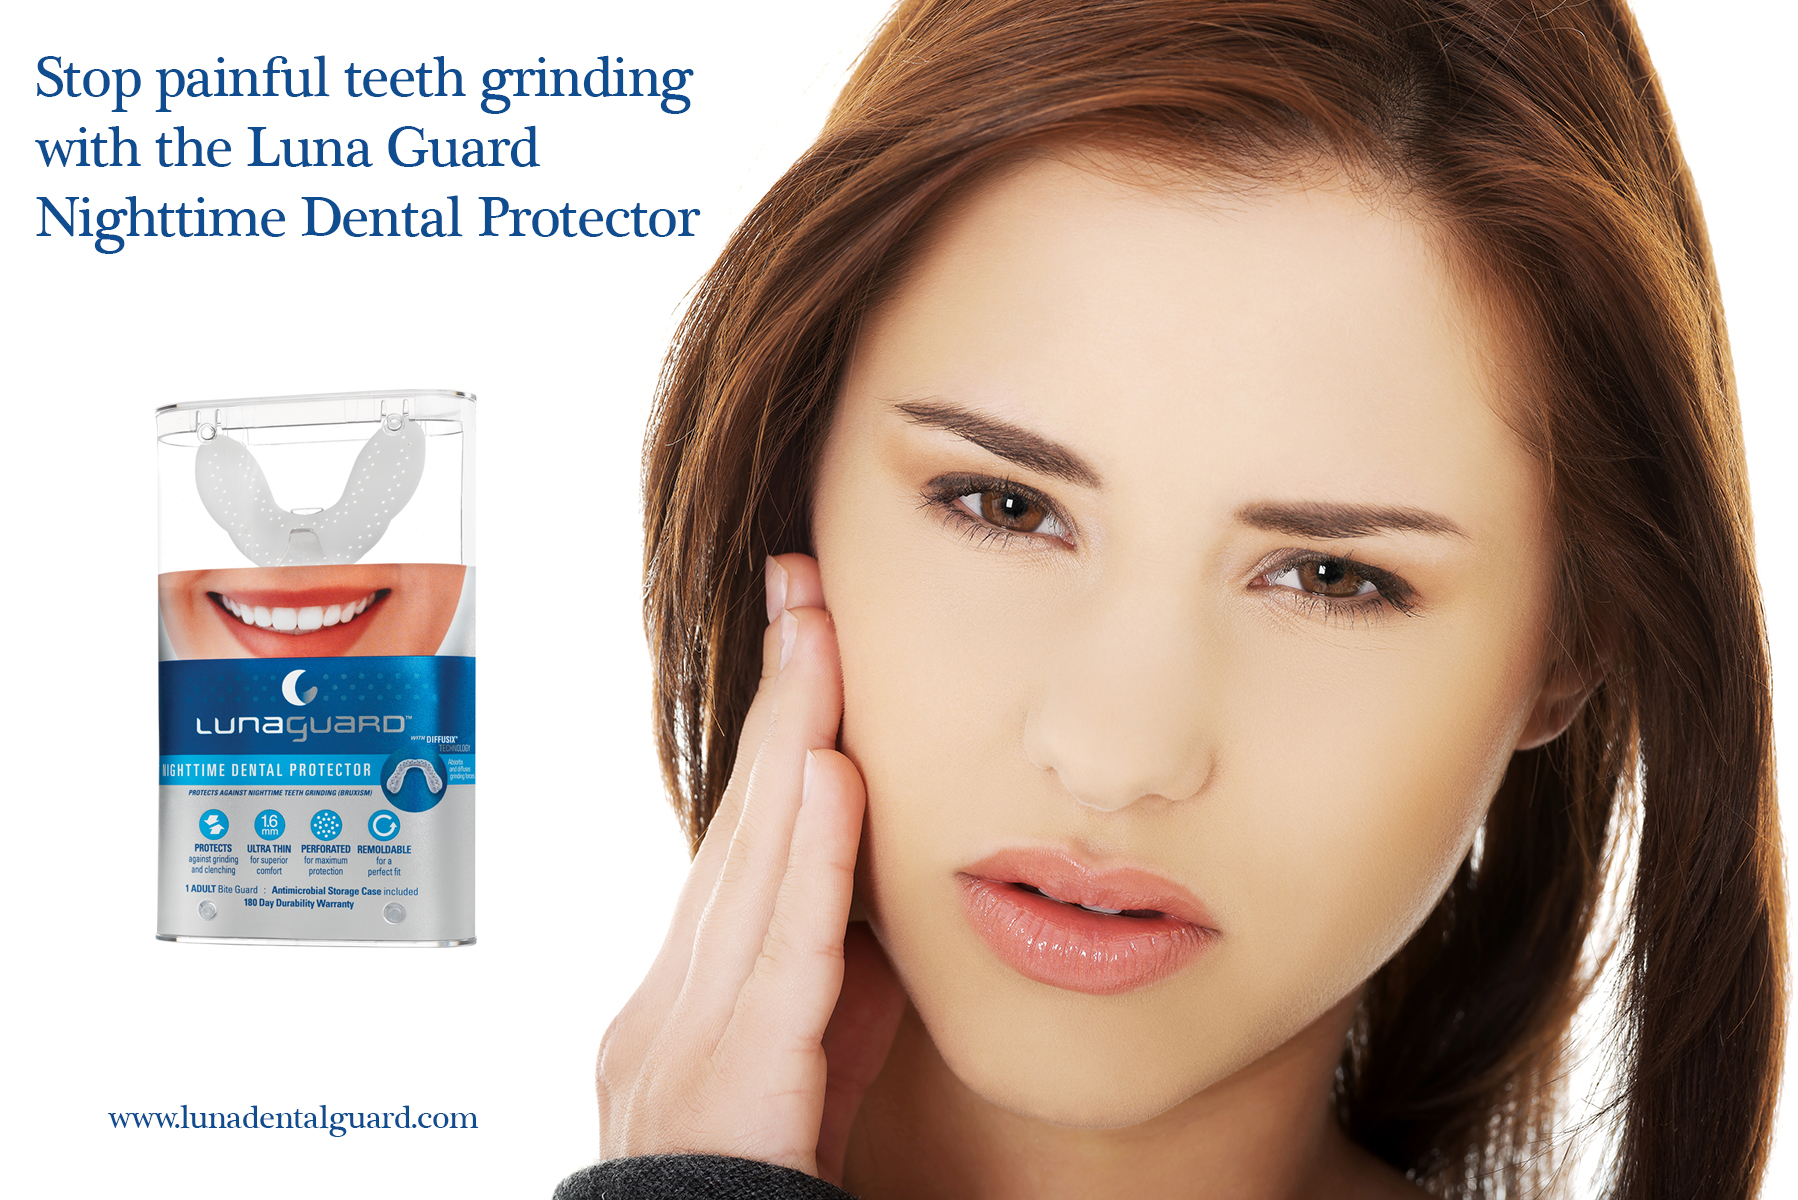 Lunaguard nighttime dental guard used to stop pain from teeth grinding